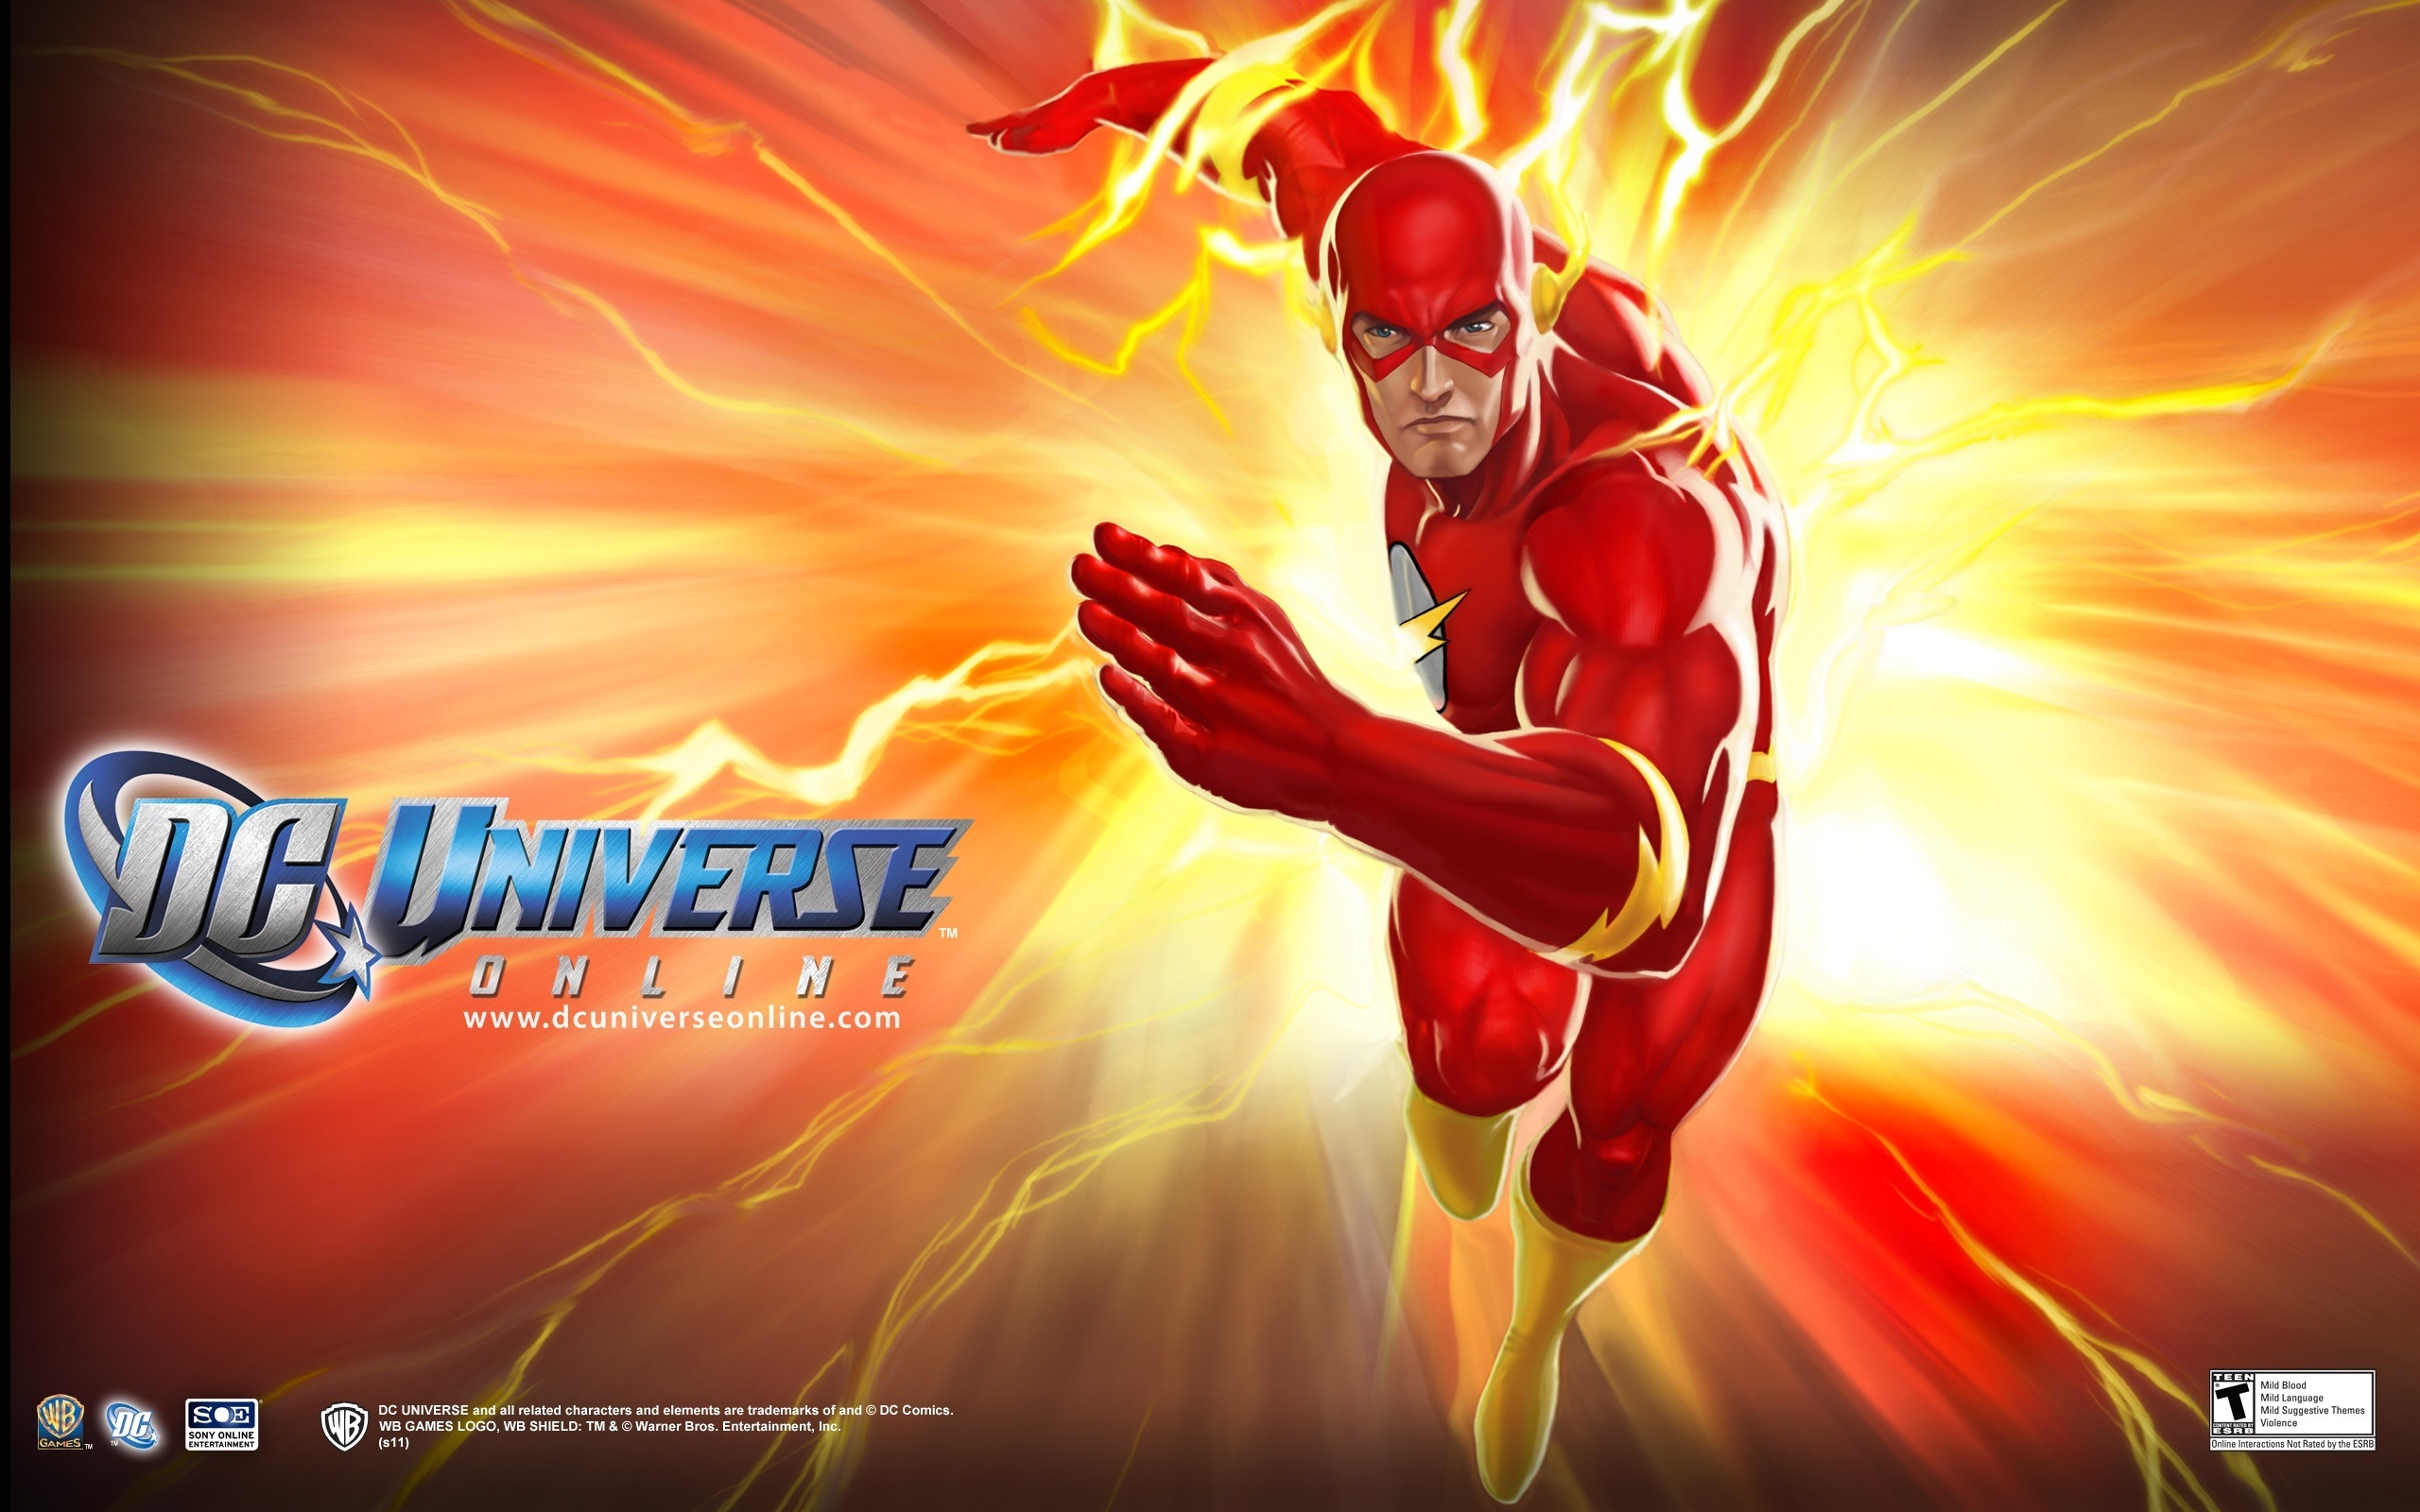 DC Universe Online HD game wallpapers #16 - 2560x1600